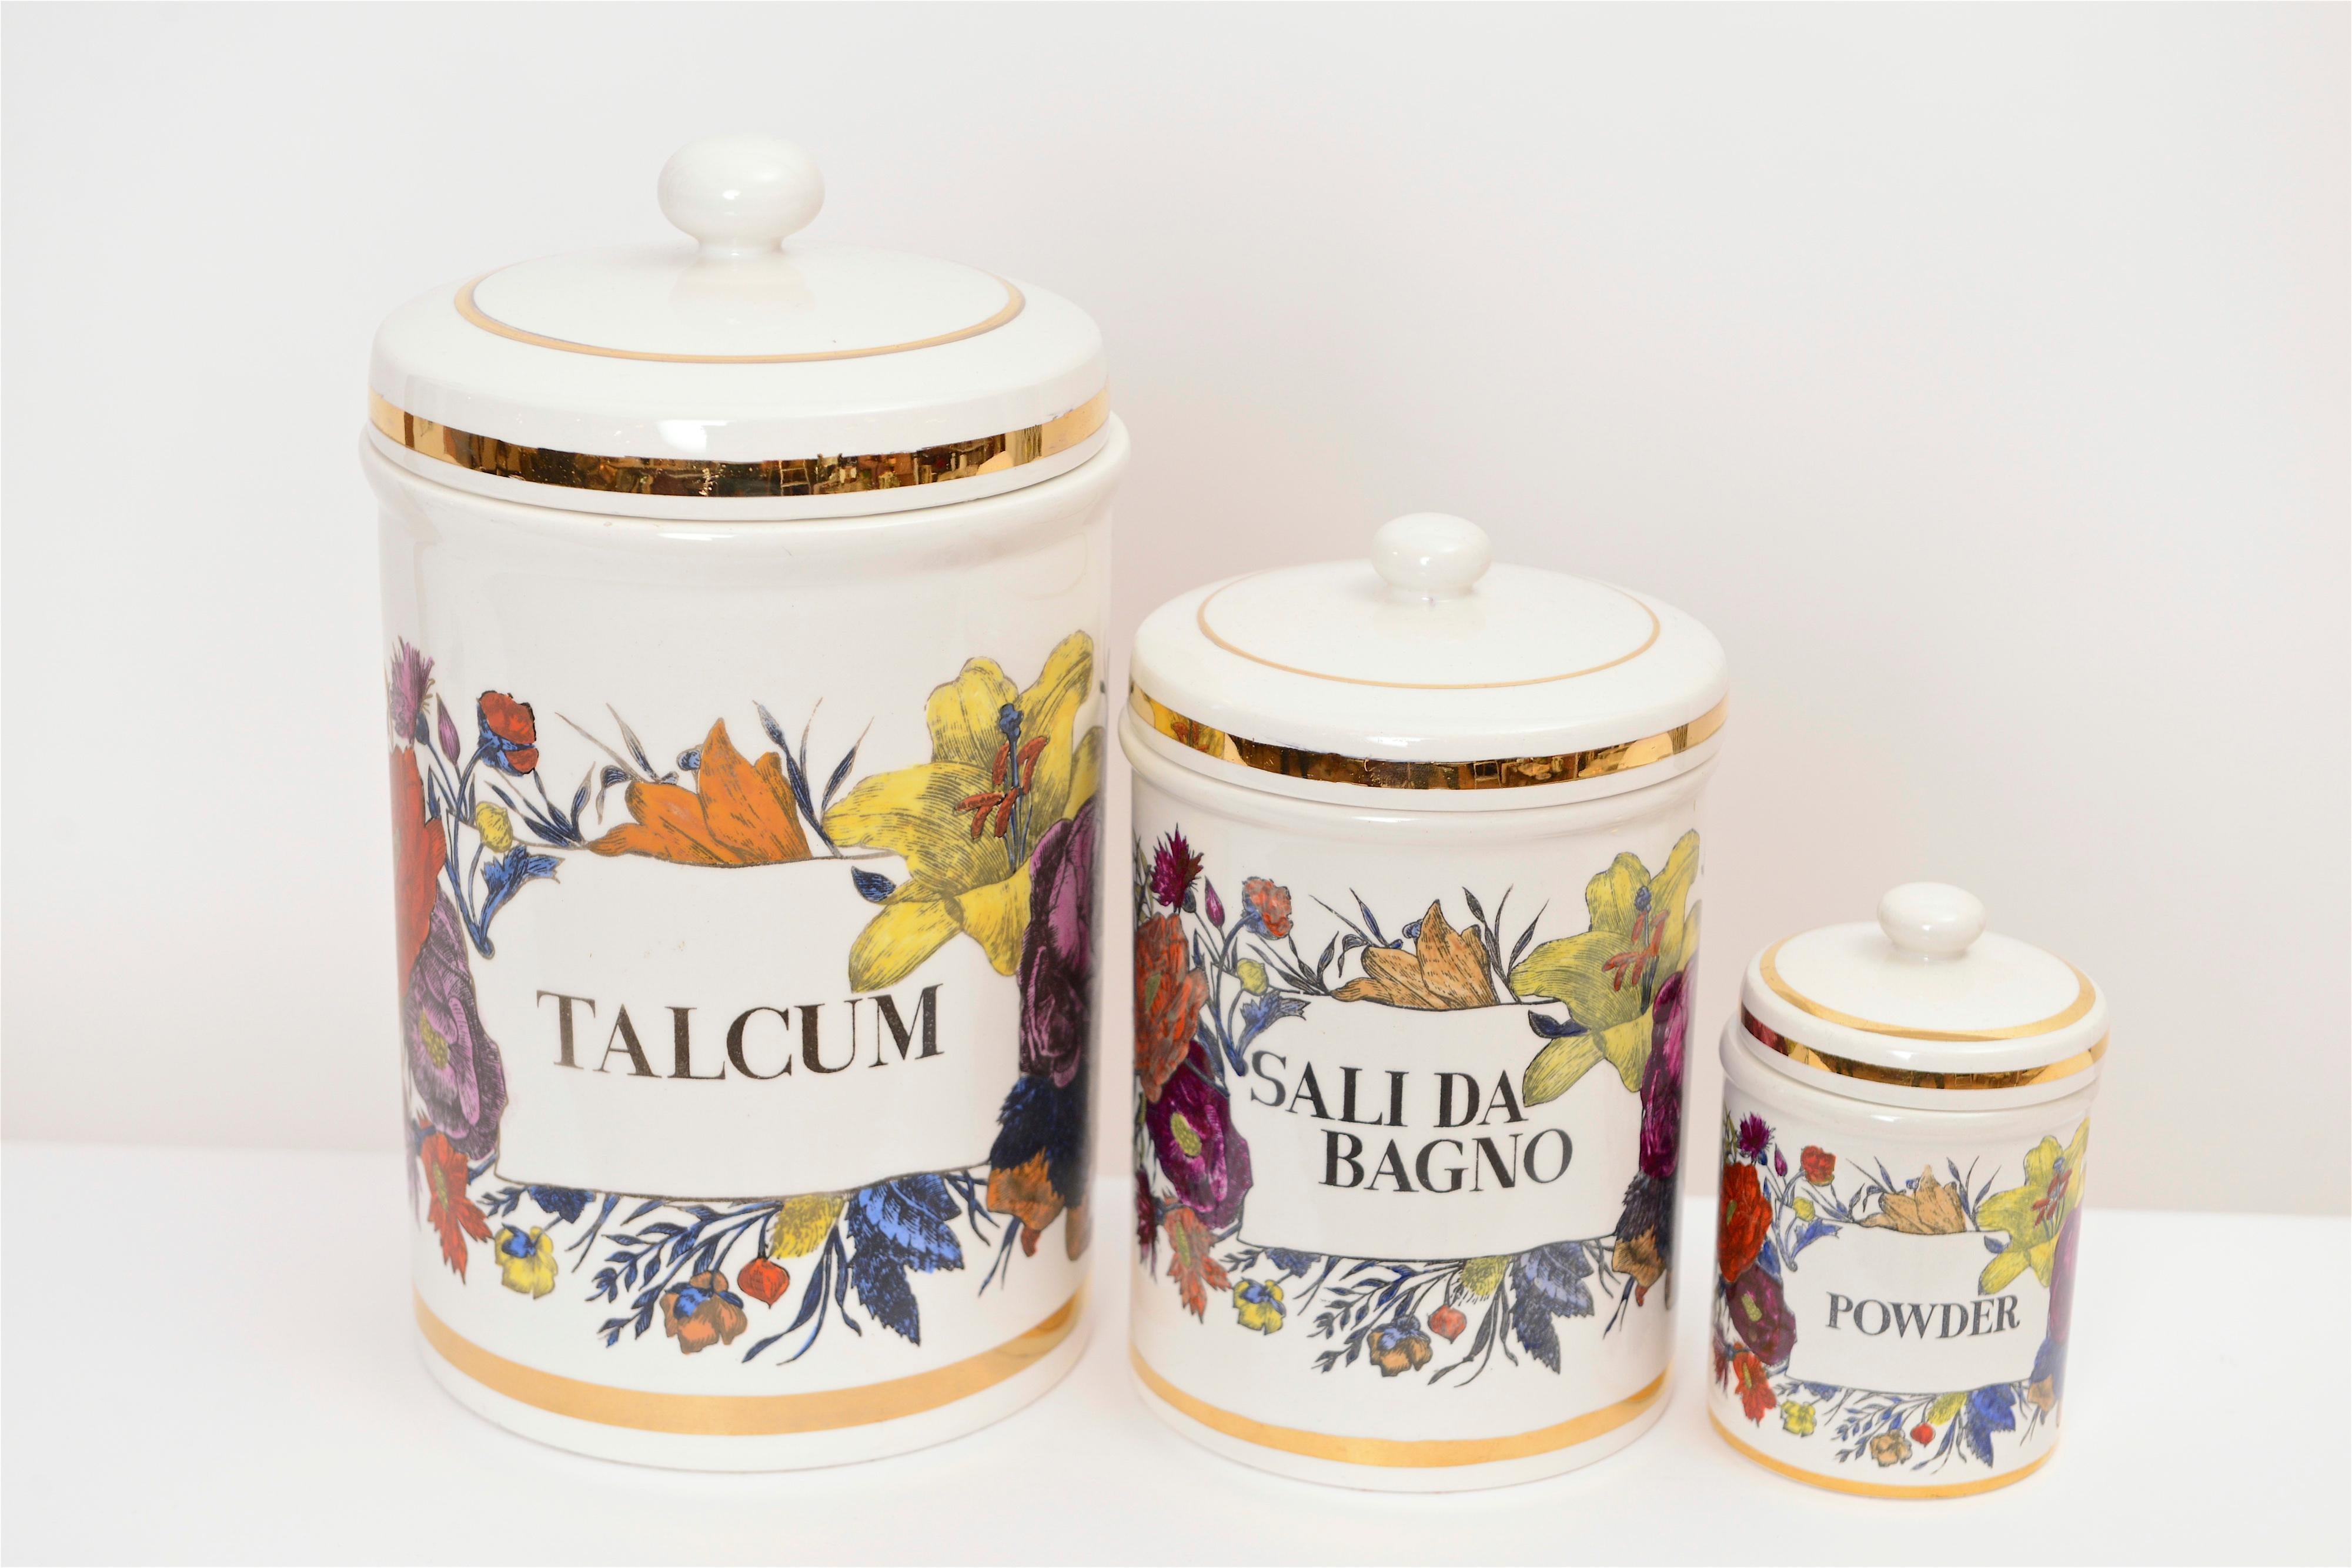 A wonderful collection of three ceramic storage jars designed by Piero Fornasetti, circa 1960. These highly decorative pieces feature hand-coloured floral transfers within the glaze whilst the contents labels read… ‘Talcum’, ‘Sali Da Bagno’ and